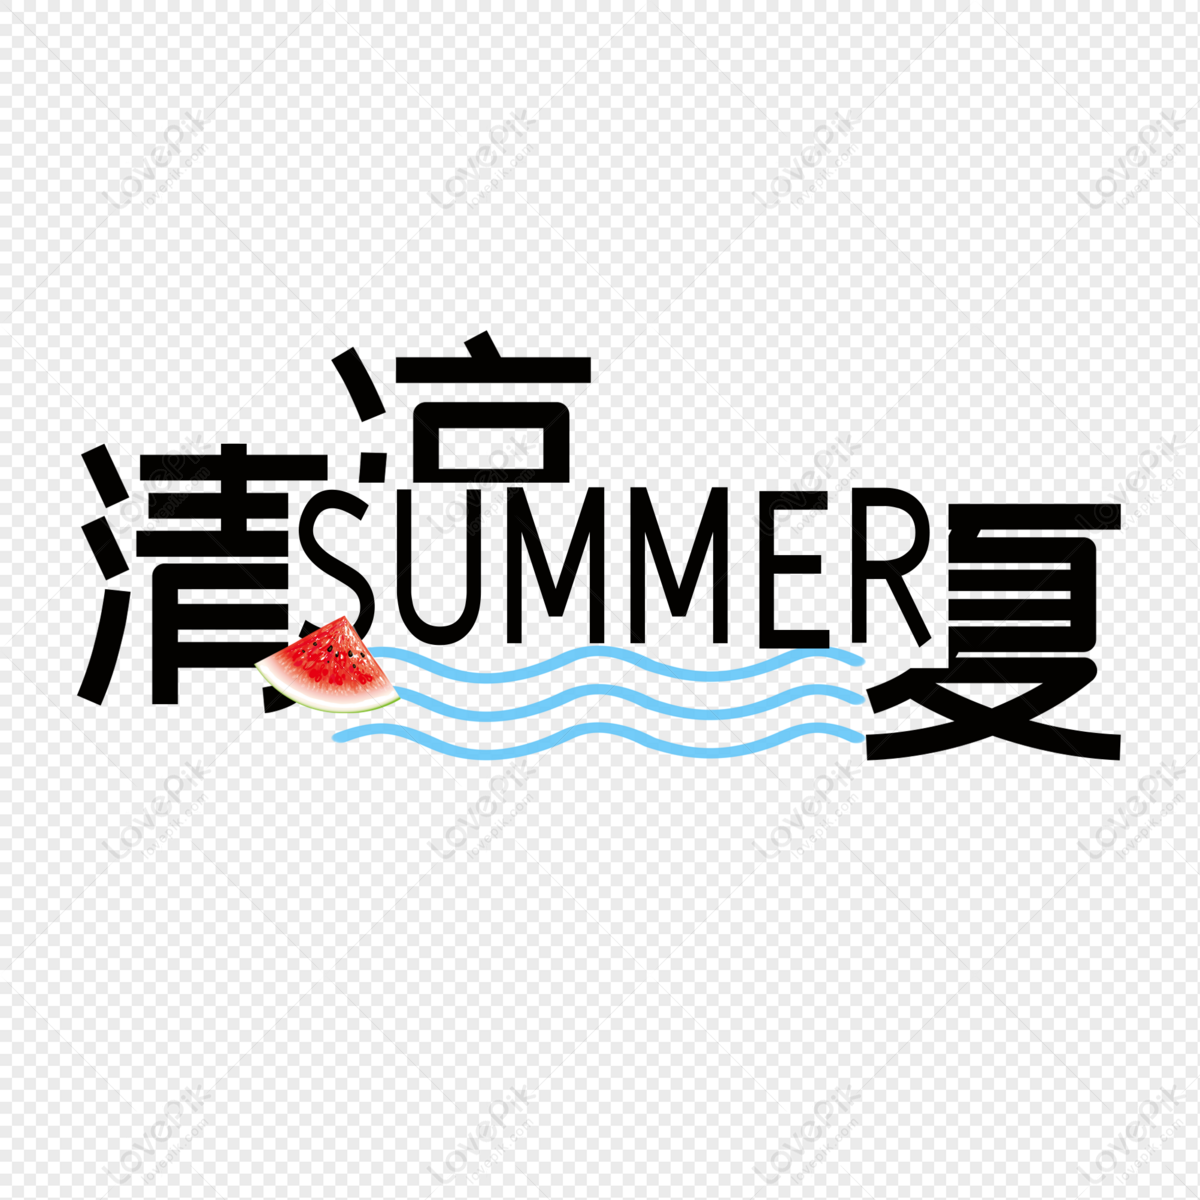 A Cool Summer PNG Image Free Download And Clipart Image For Free ...